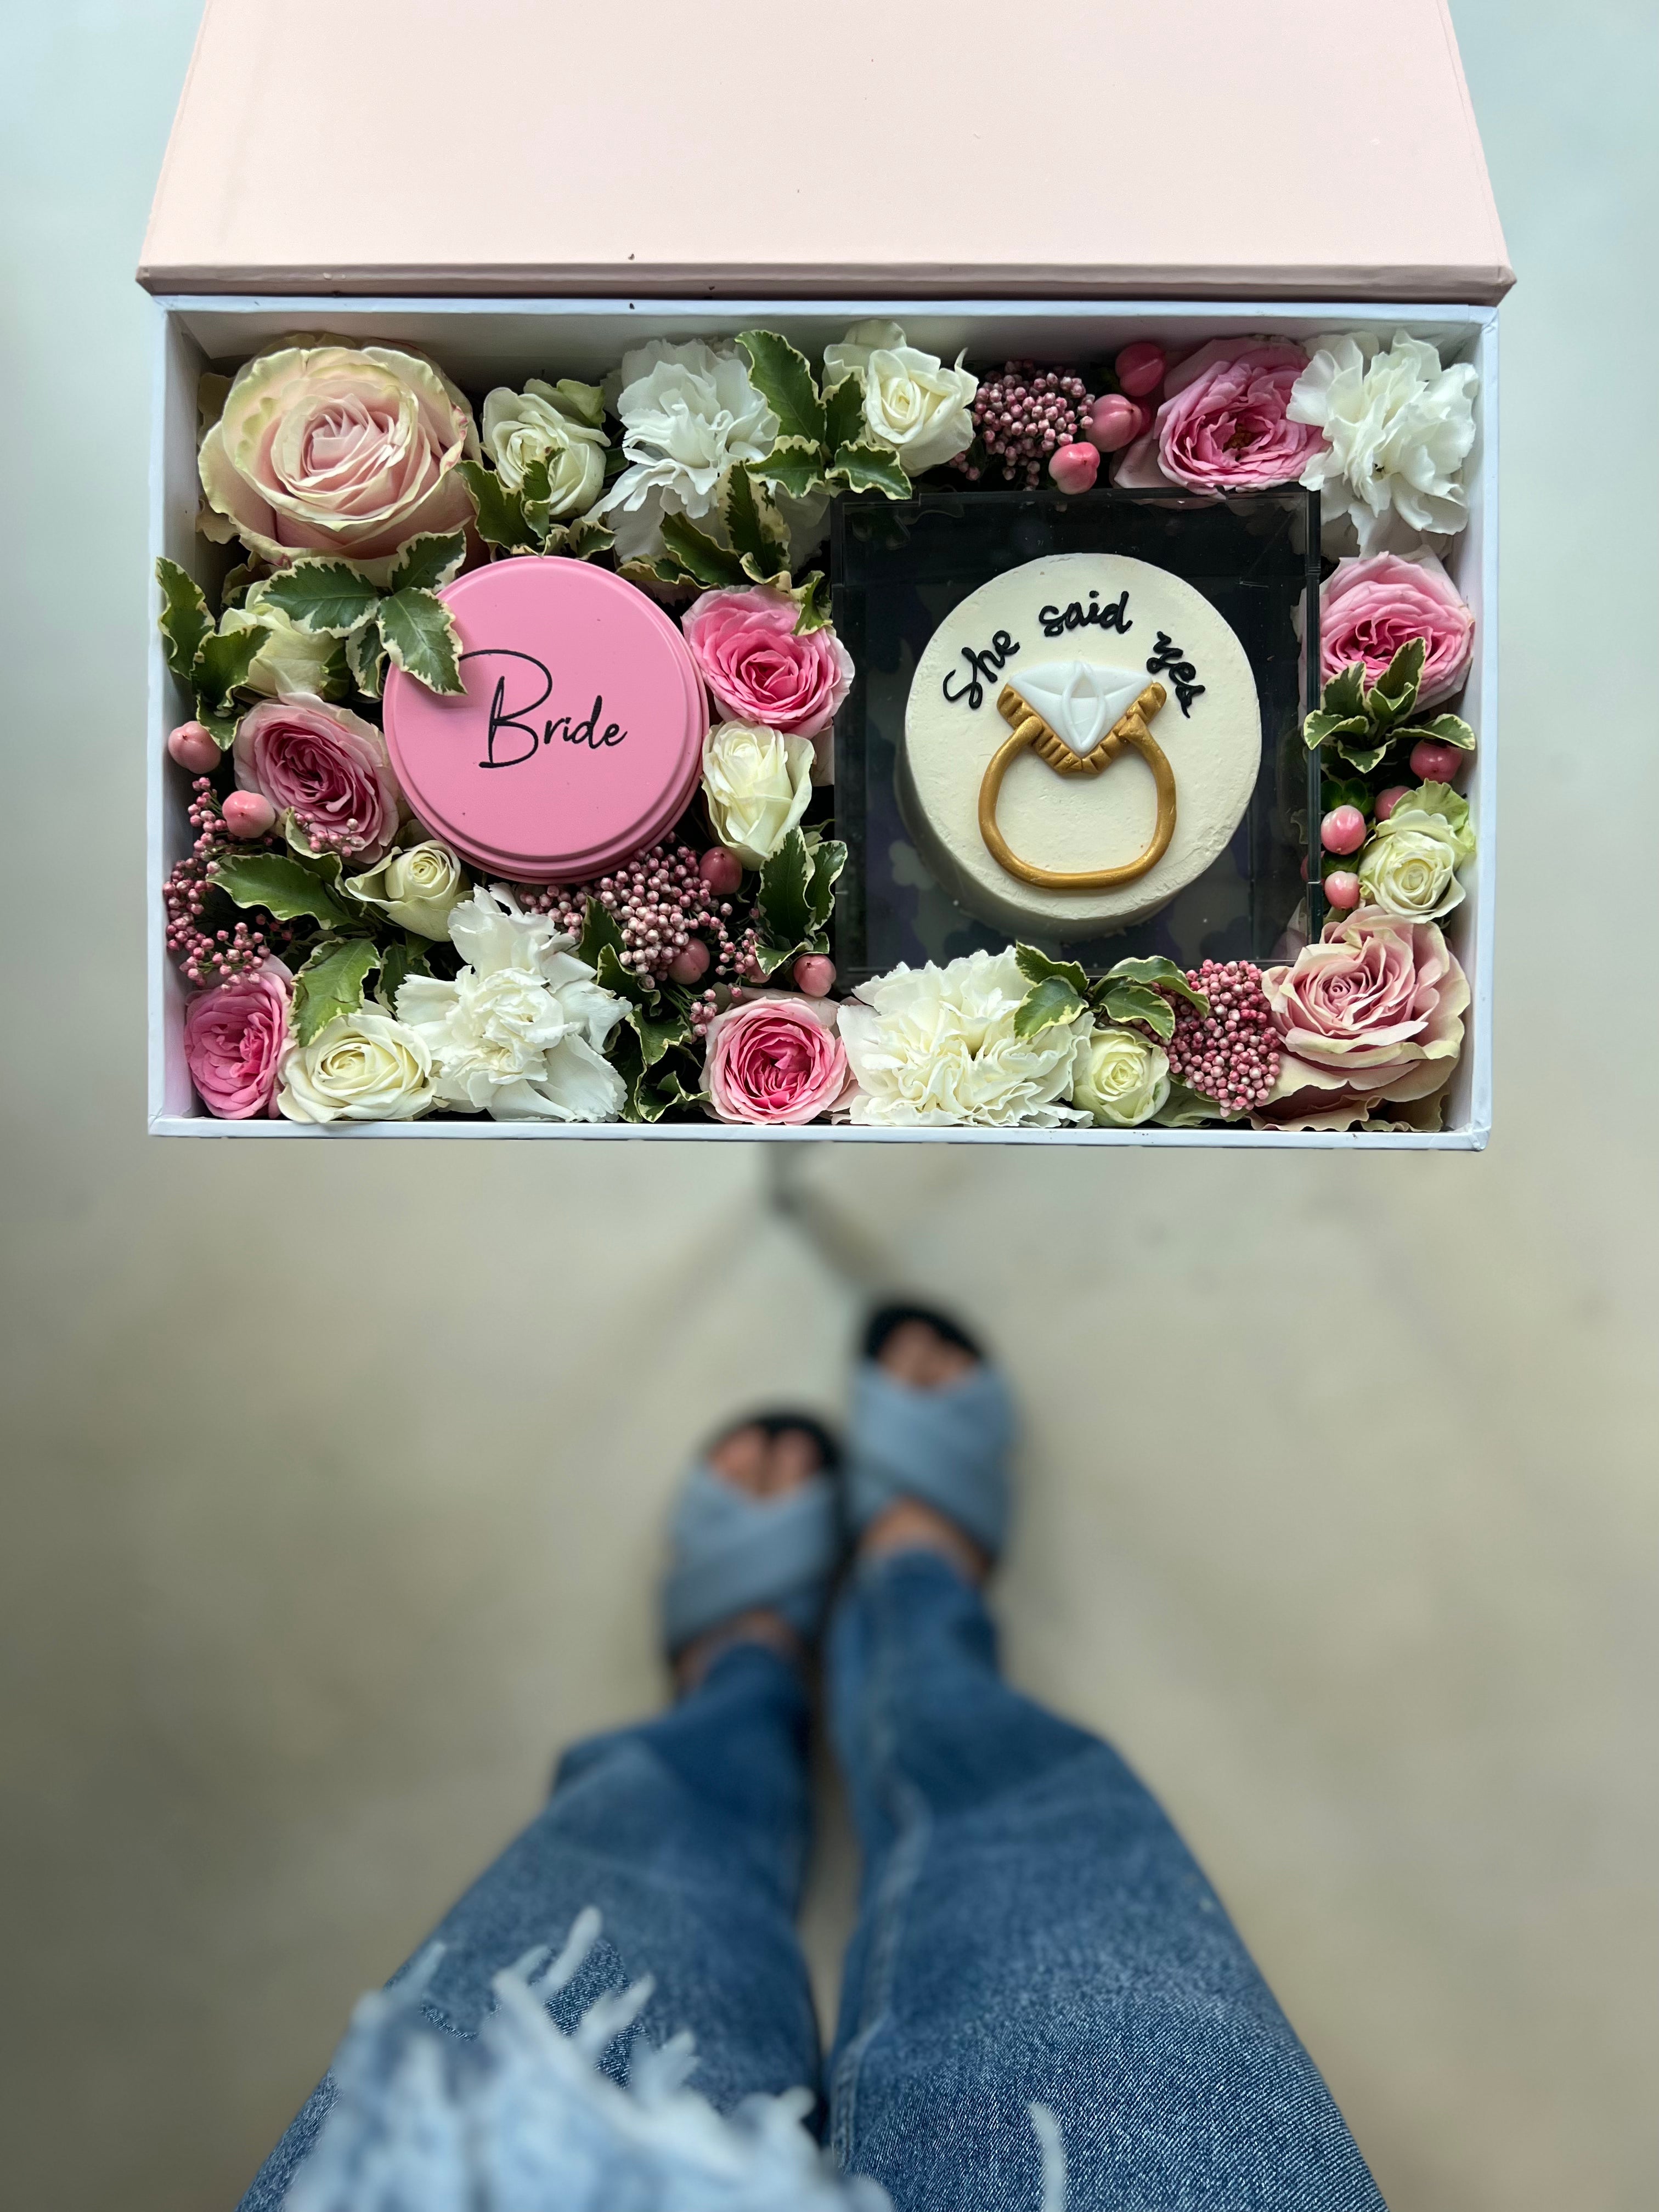 She Said Yes! Cake Parcel w/ Pink Bride Candle